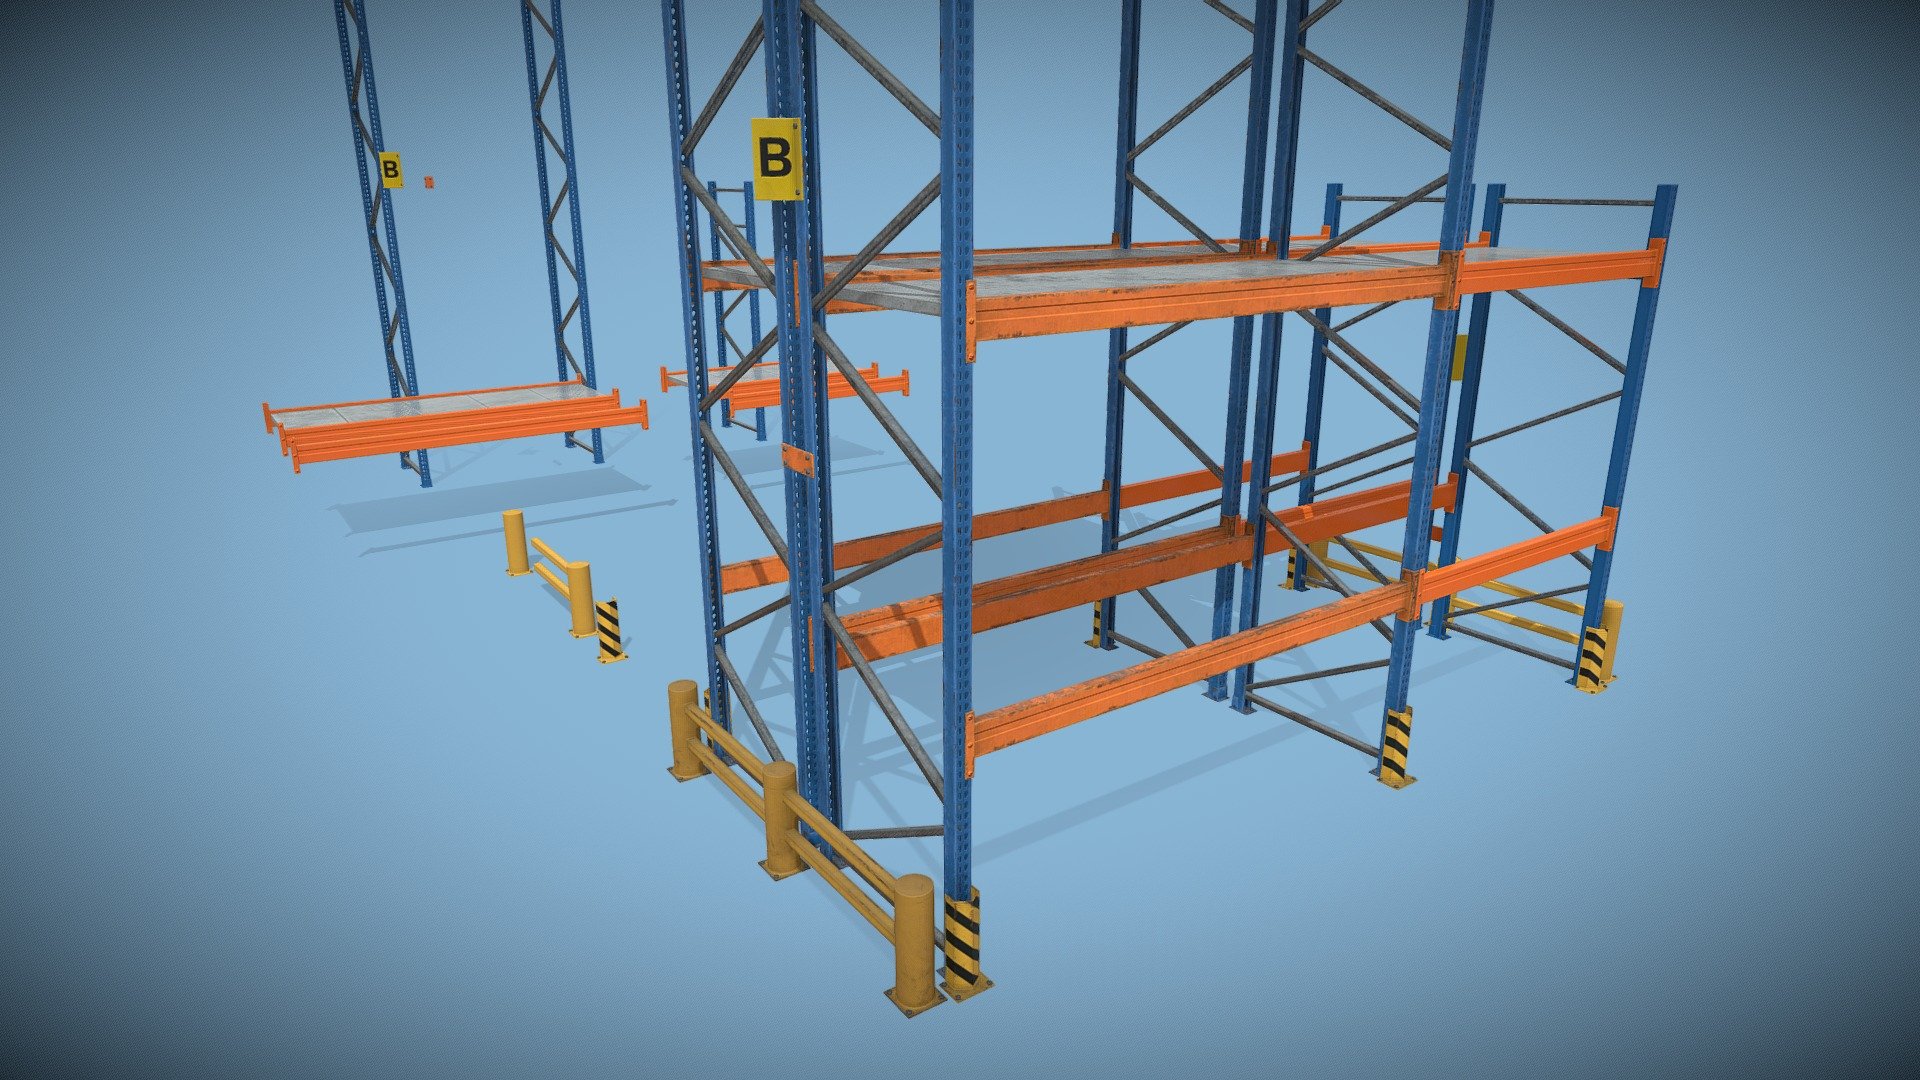 Build your own warehouse rack with this set of low-poly modular assets. All assets can be placed using a standard 10 cm snap grid which can be used directly in game engines such as Unreal. The Blender file included is configured for this snap grid and can be used while applying &ldquo;snapping